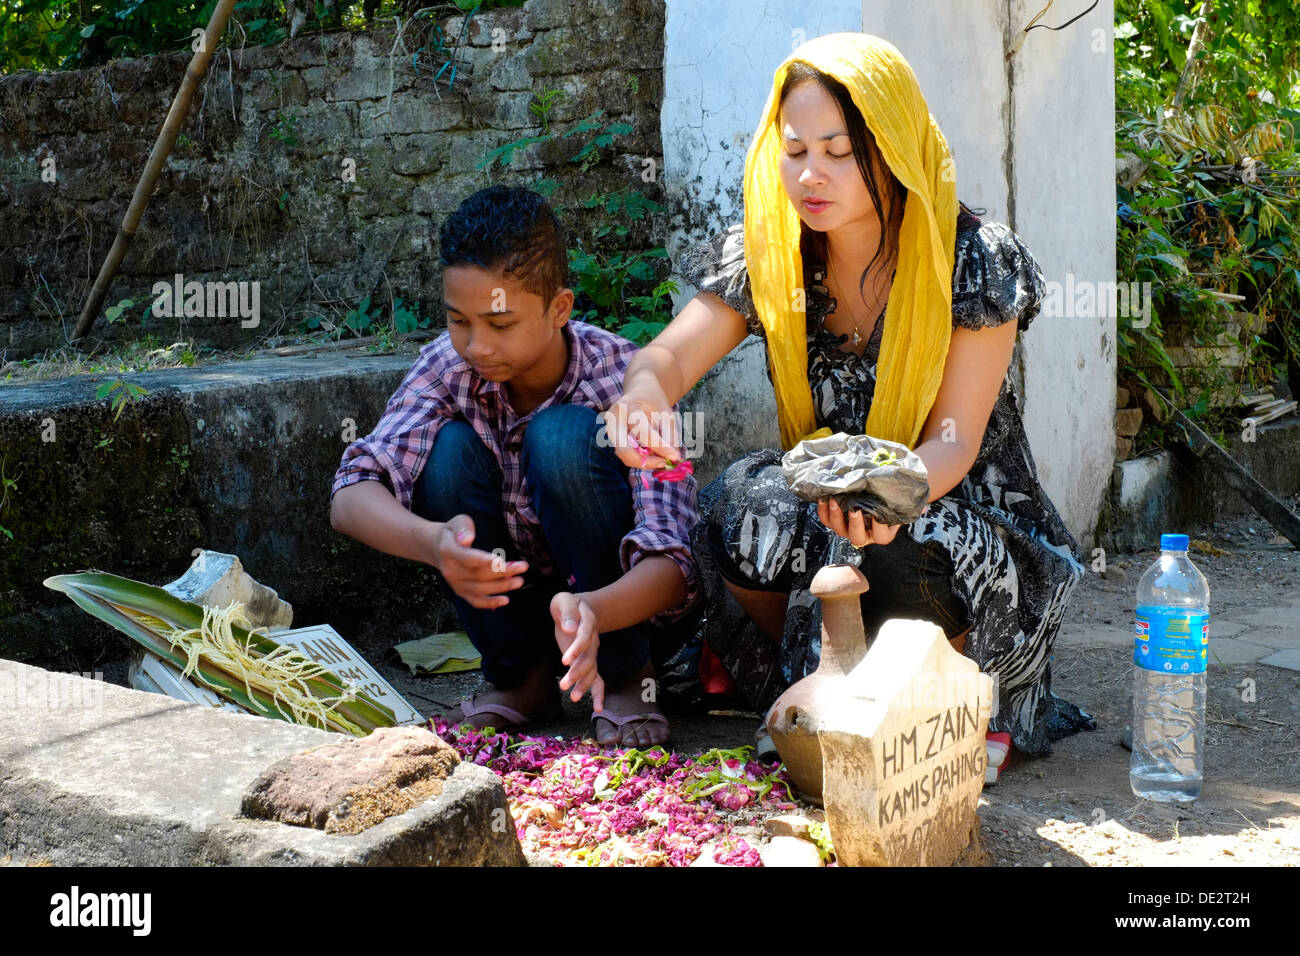 indonesian woman tends to pays her respects and prays at her fathers grave accompanied by her son Stock Photo